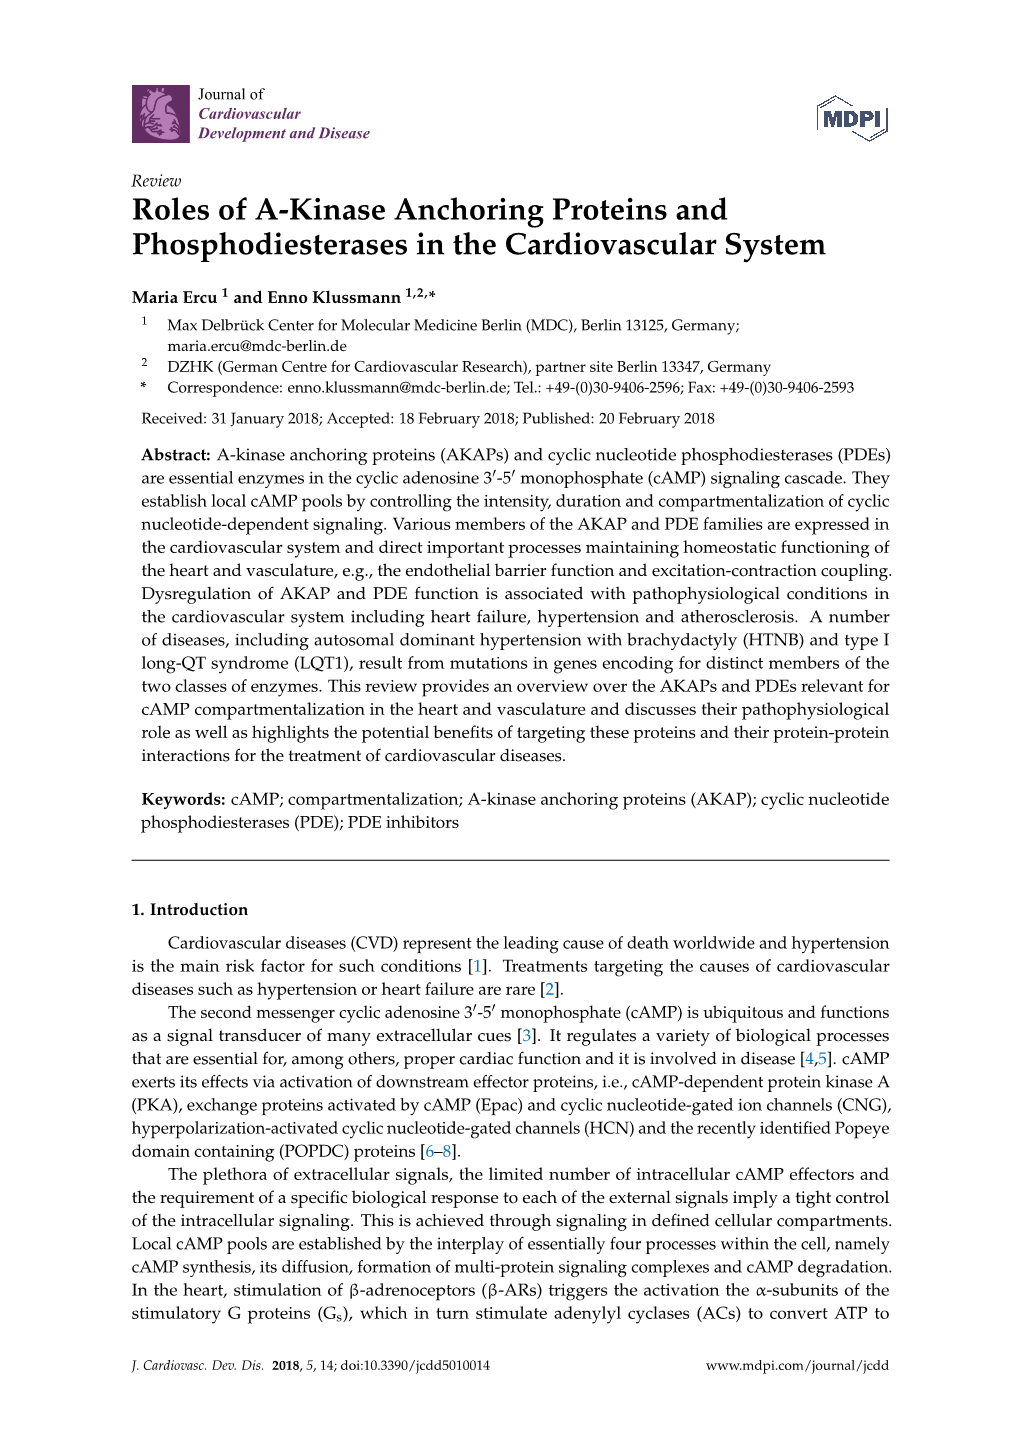 Roles of A-Kinase Anchoring Proteins and Phosphodiesterases in the Cardiovascular System